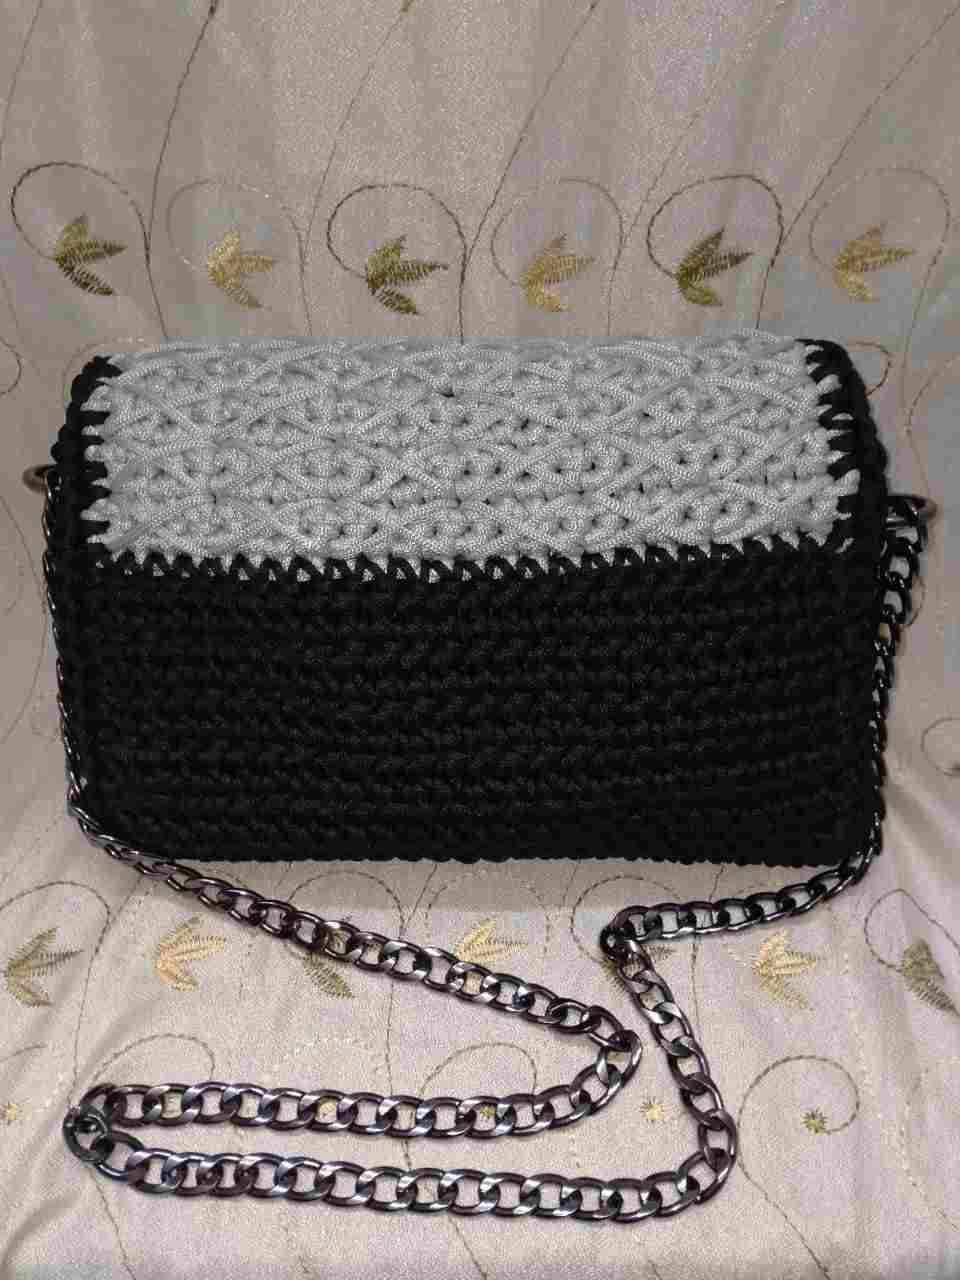 A crochet bag with a metal chain hand